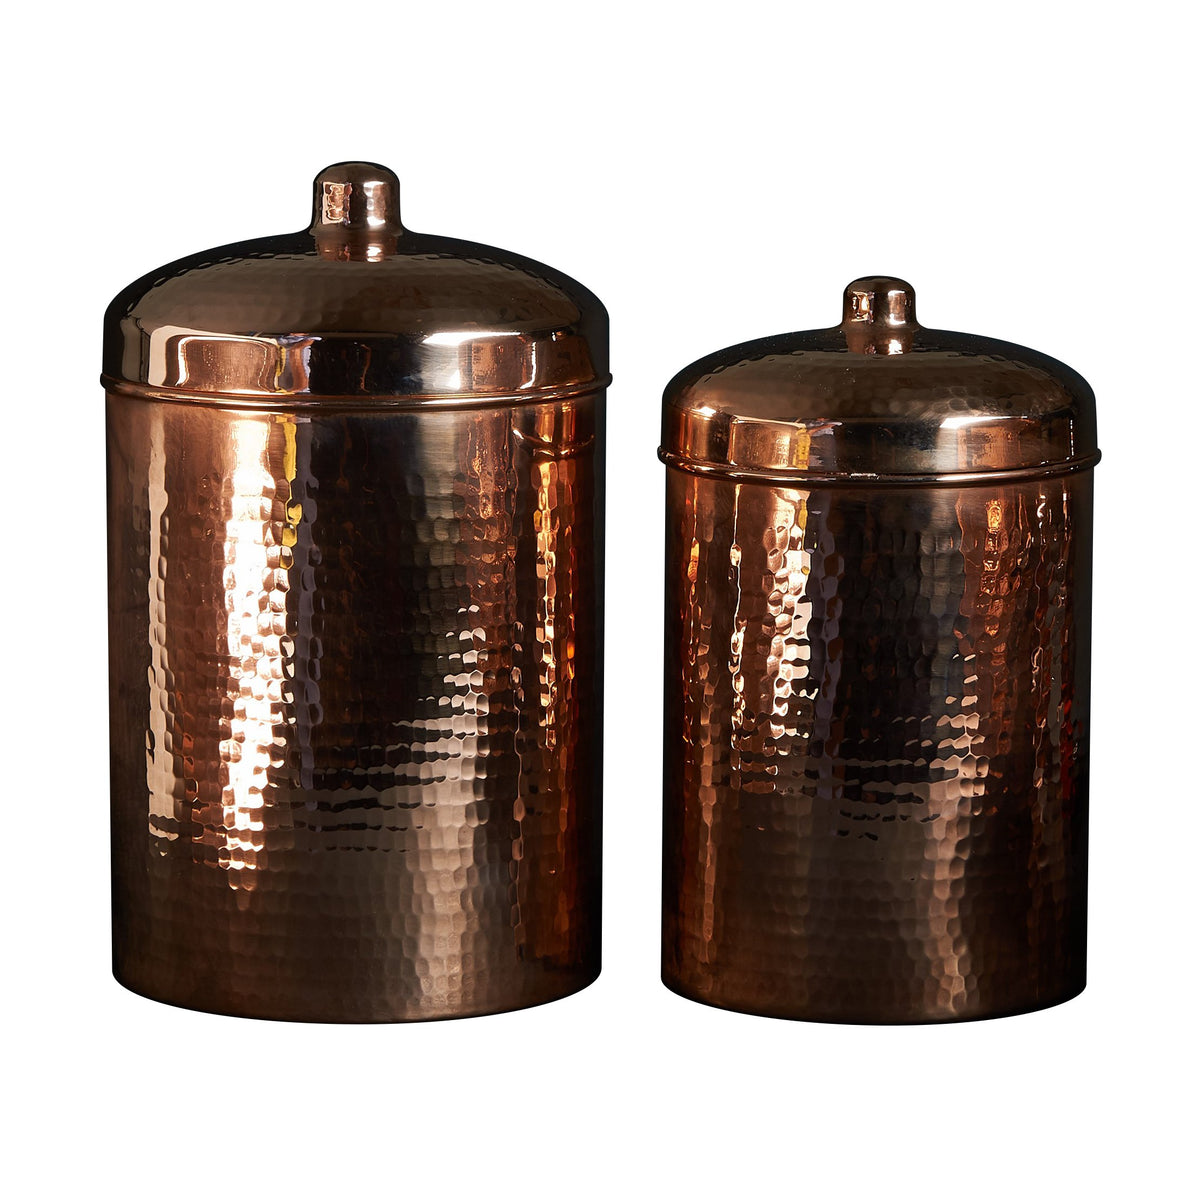 Copper Kitchen Canisters - Large Set, 2 Pieces